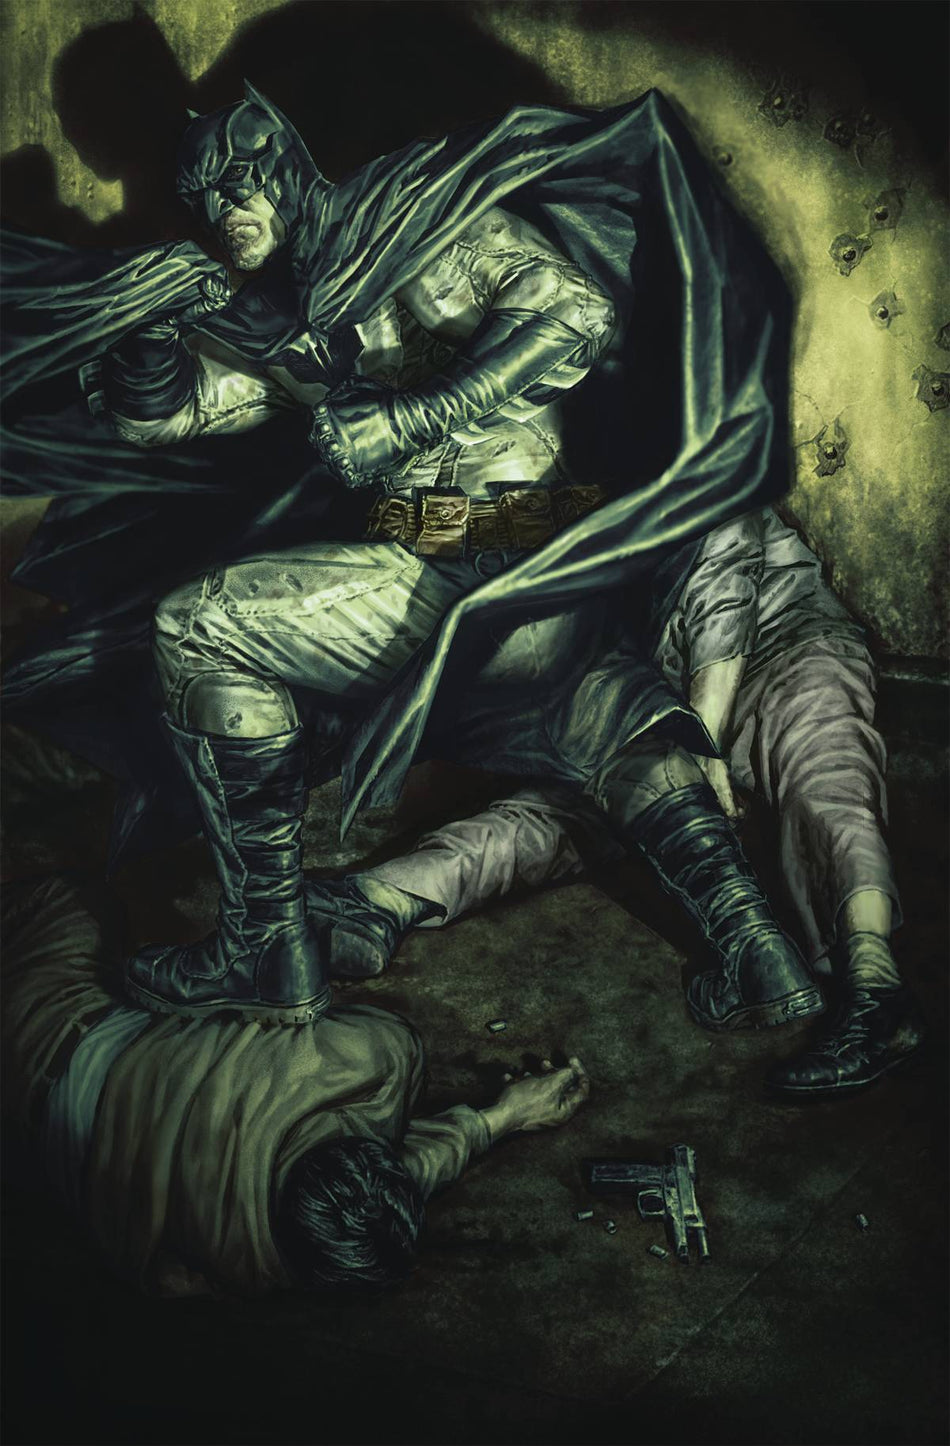 Photo of Detective Comics Issue 1023 Card Stock Lee Bermejo Var Ed Joker W comic sold by Stronghold Collectibles